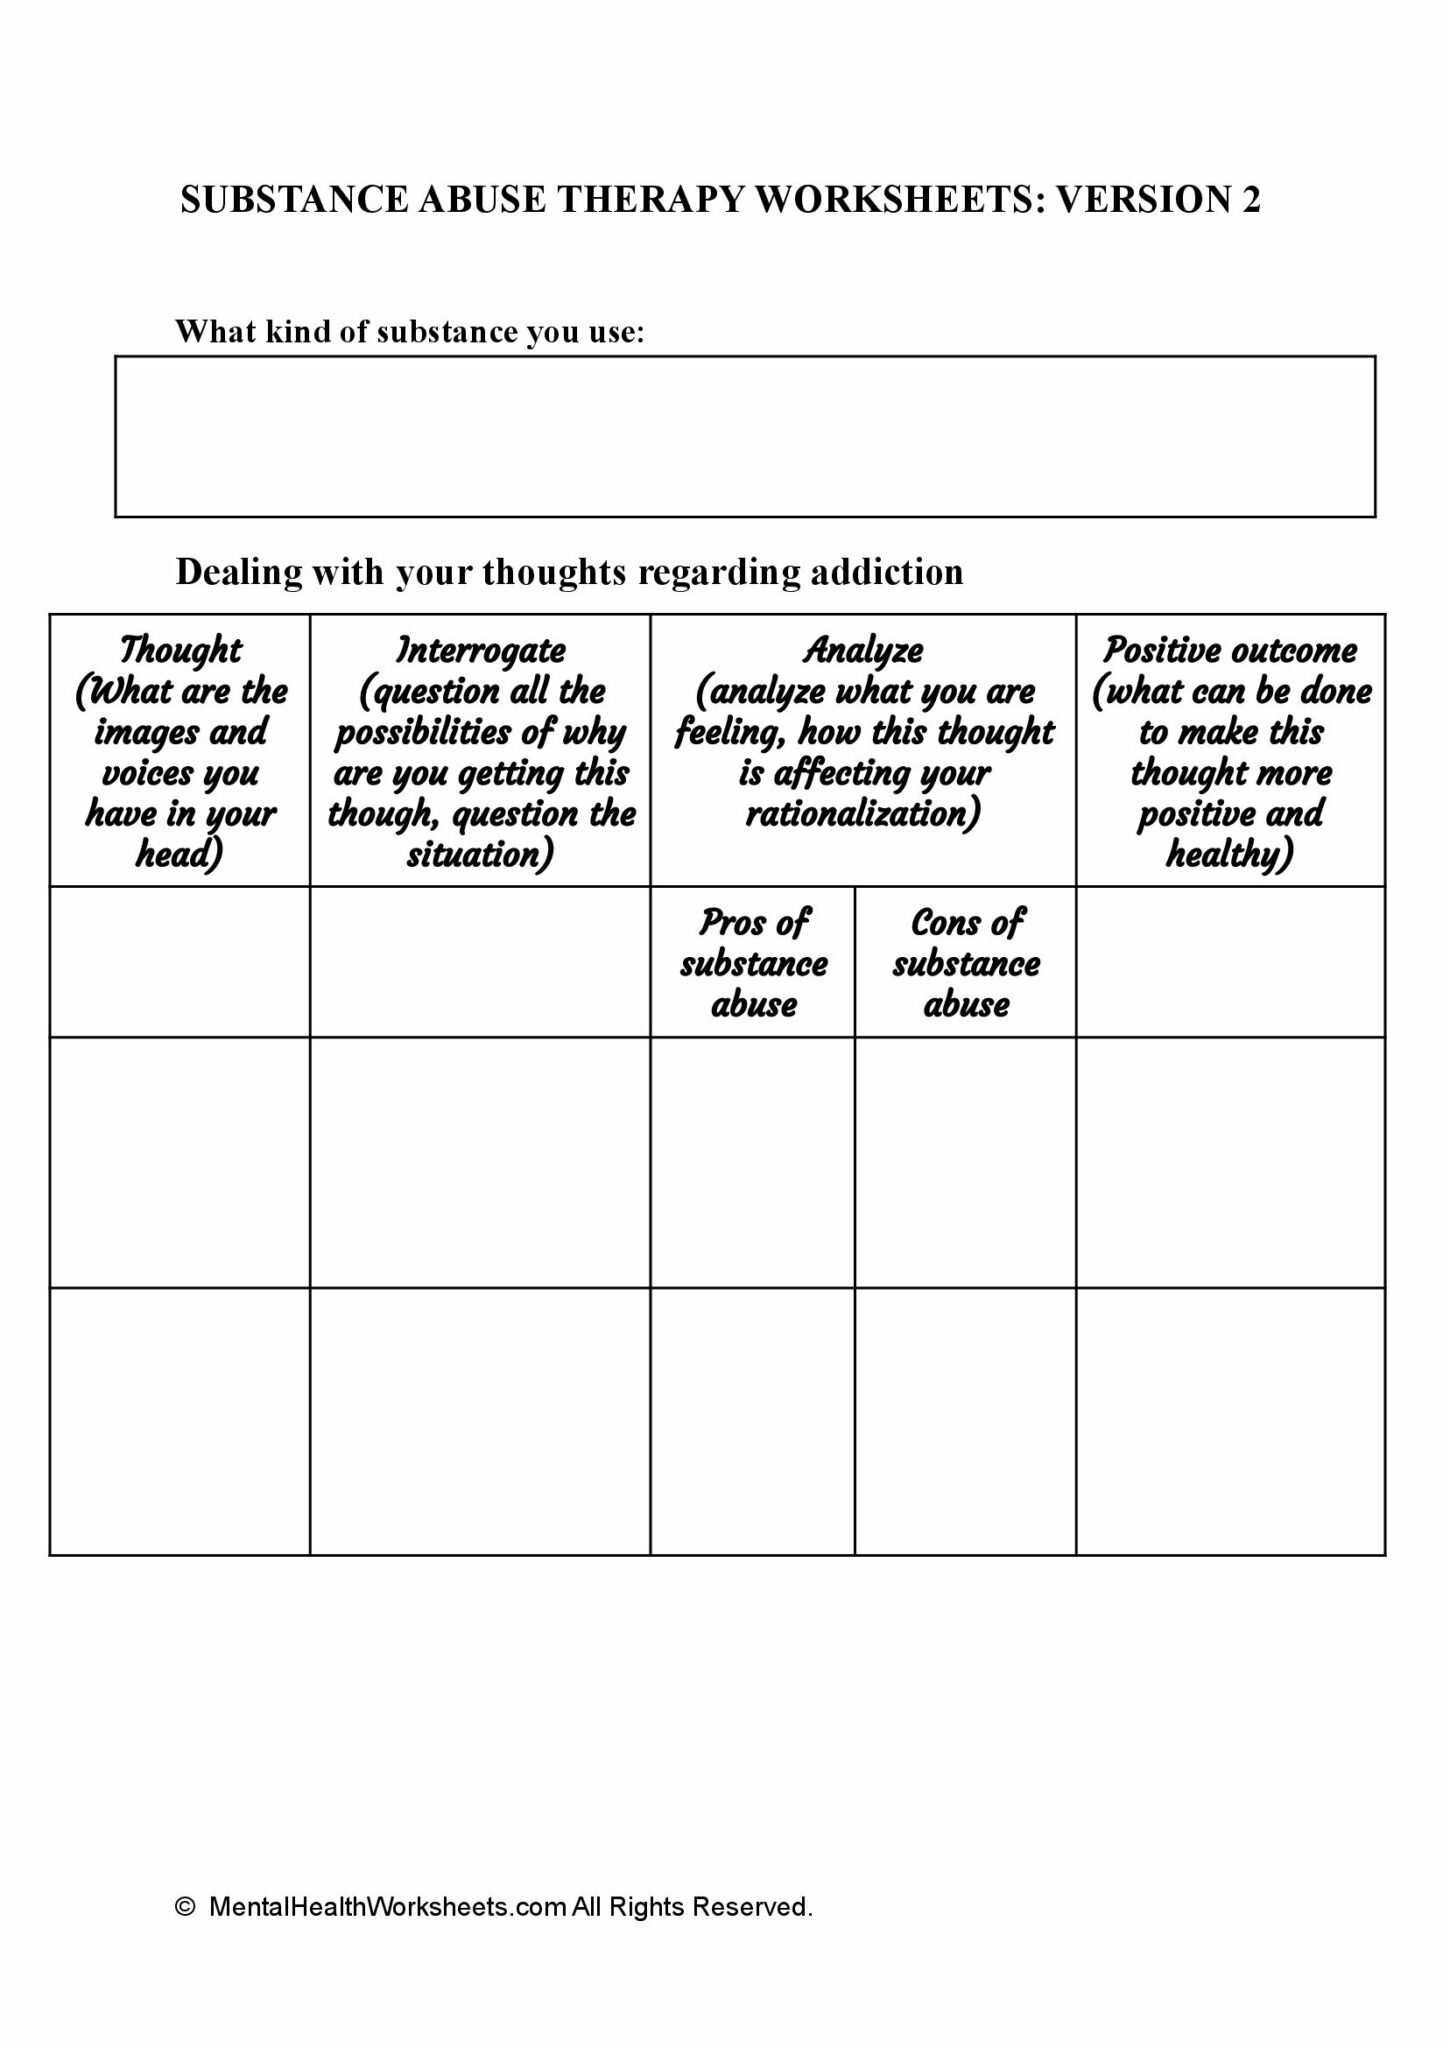 SUBSTANCE ABUSE THERAPY WORKSHEETS VERSION 2 Mental Health Worksheets